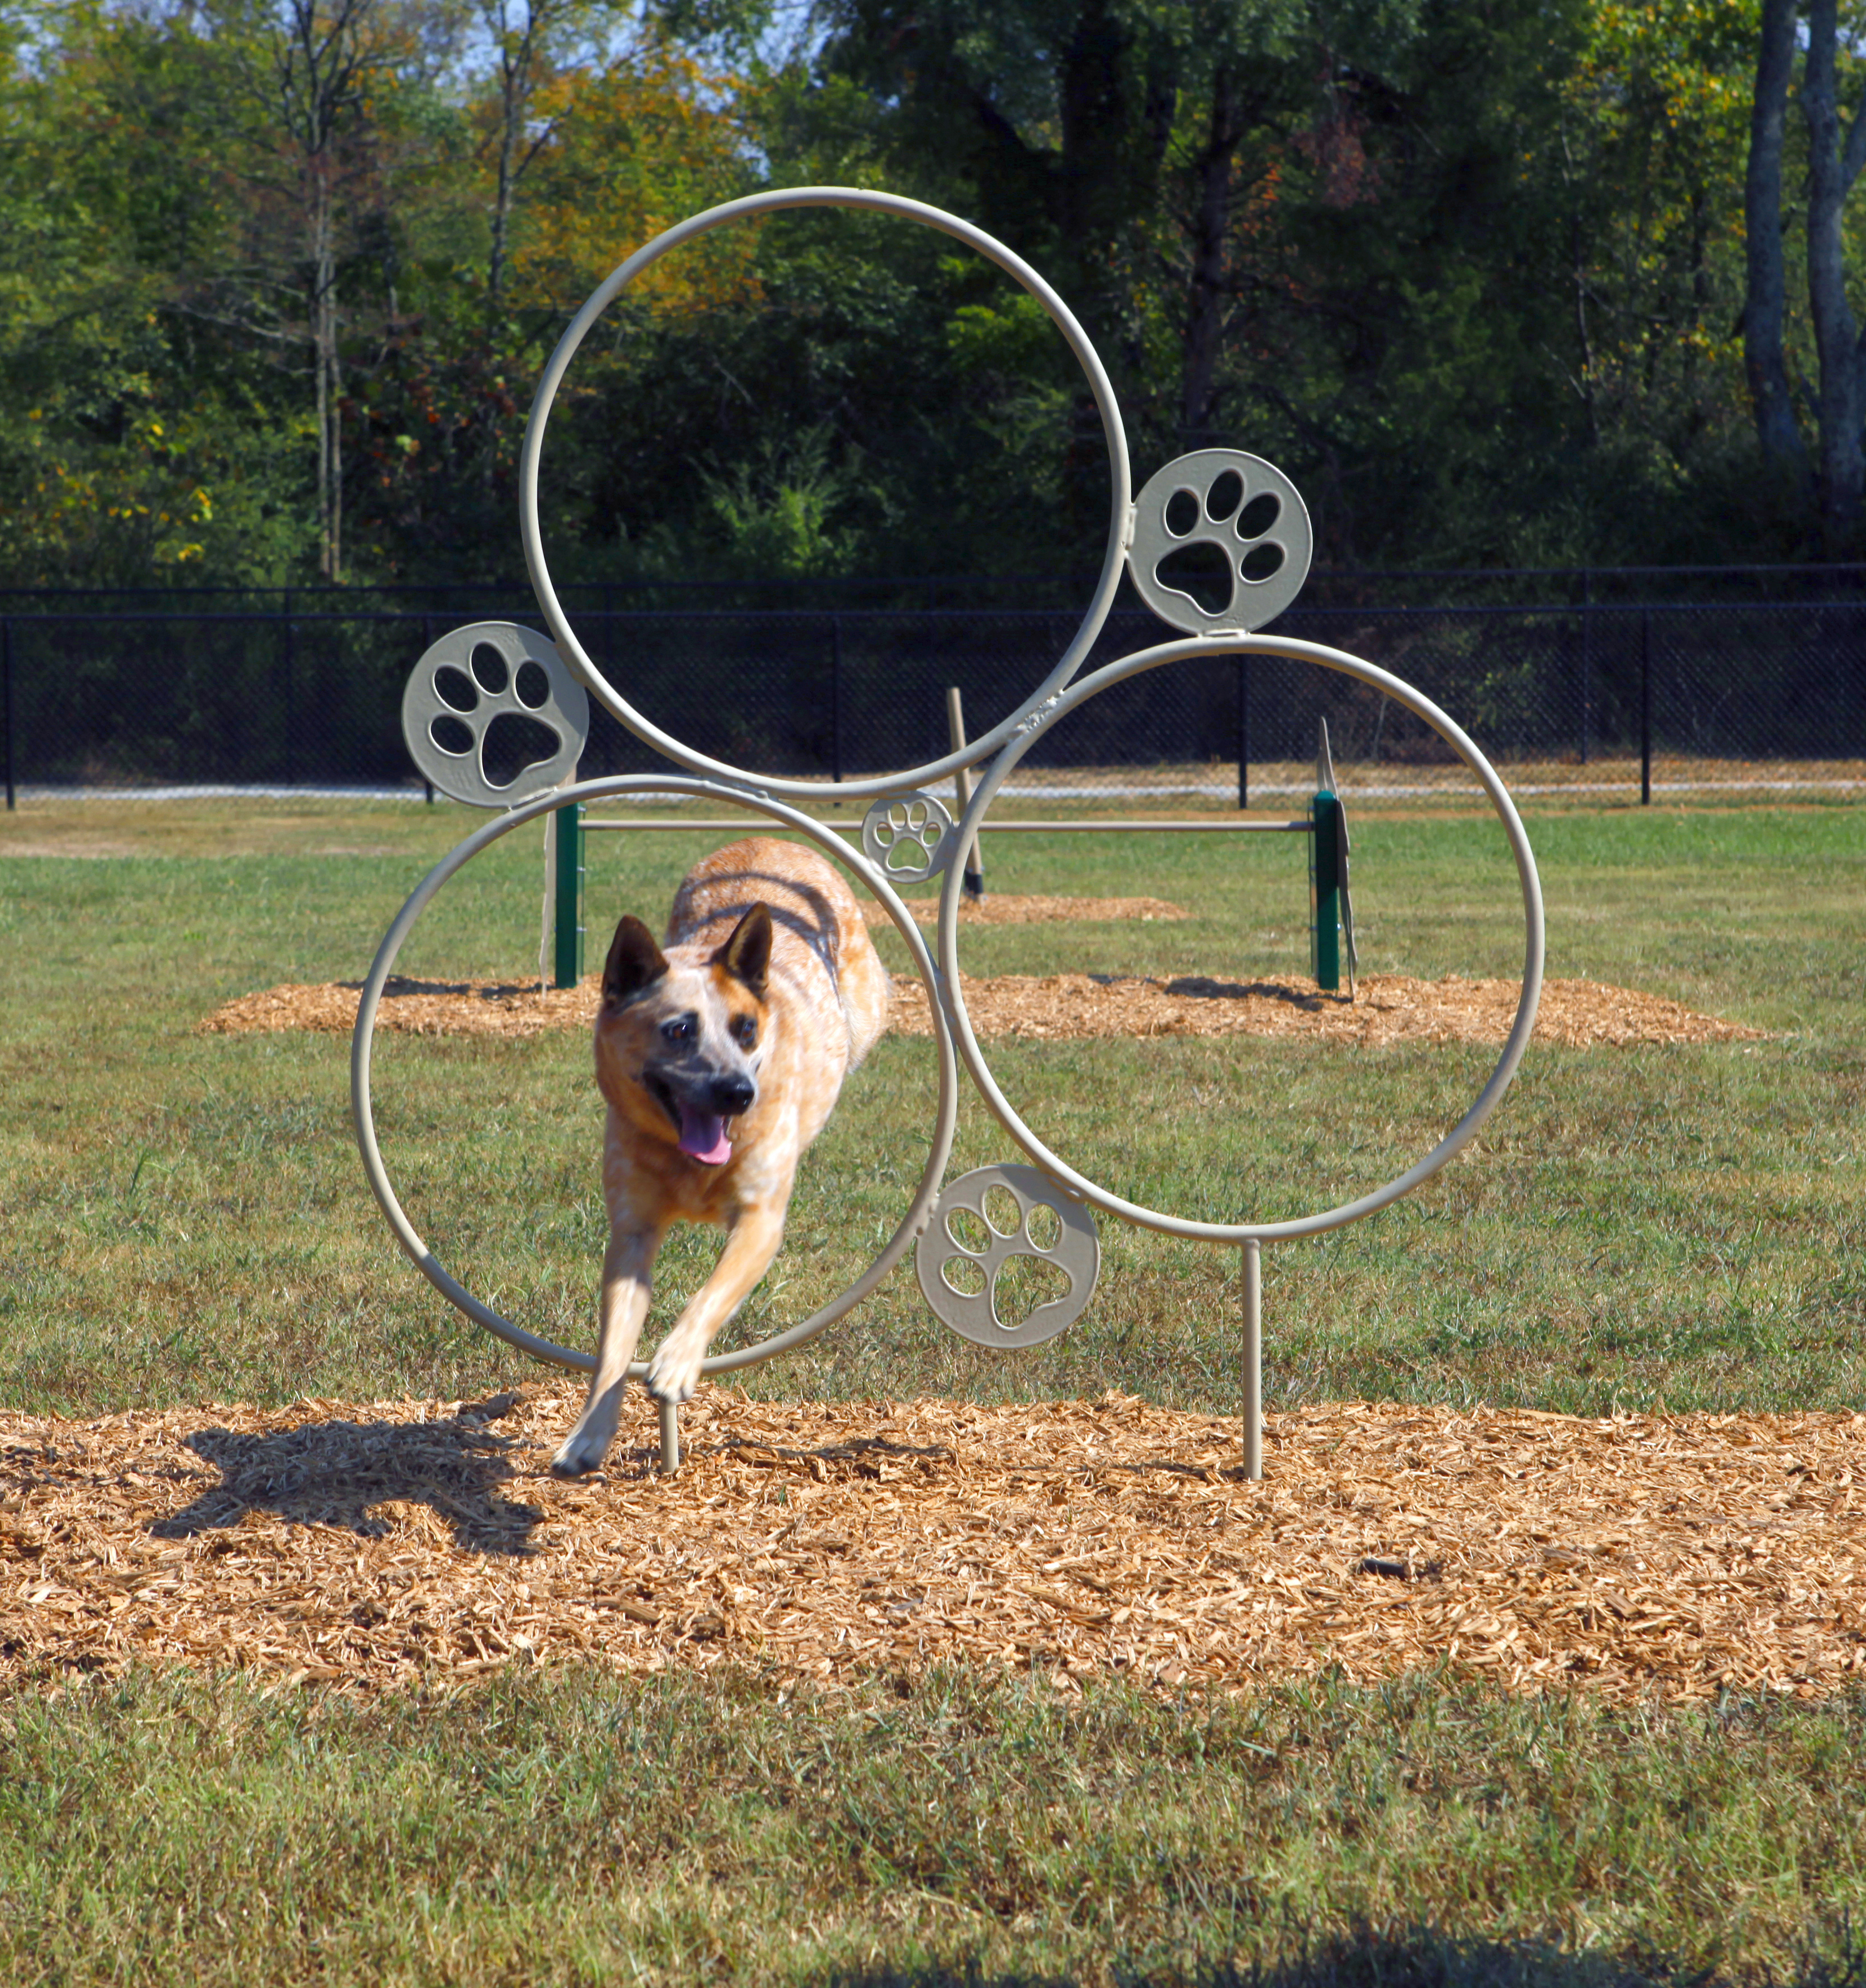 Dog Park Playground Equipment Bliss Products and